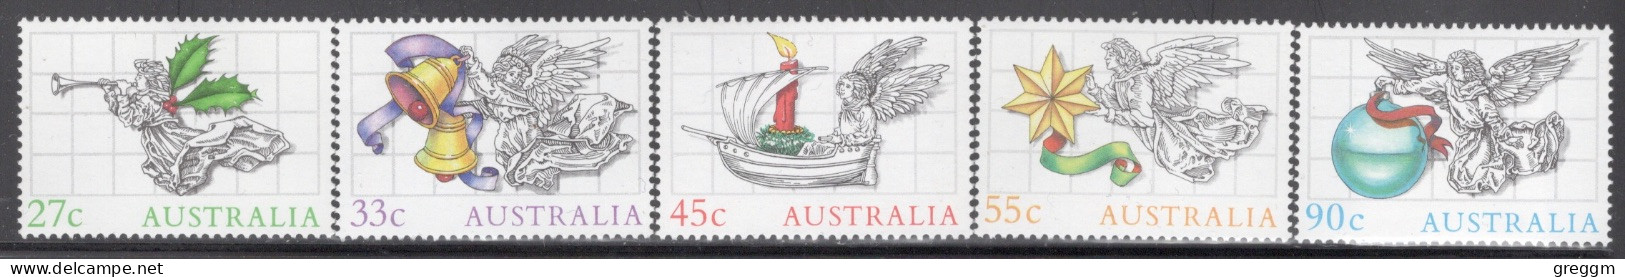 Australia 1985 Set Of Stamps To Celebrate Christmas In Unmounted Mint - Mint Stamps